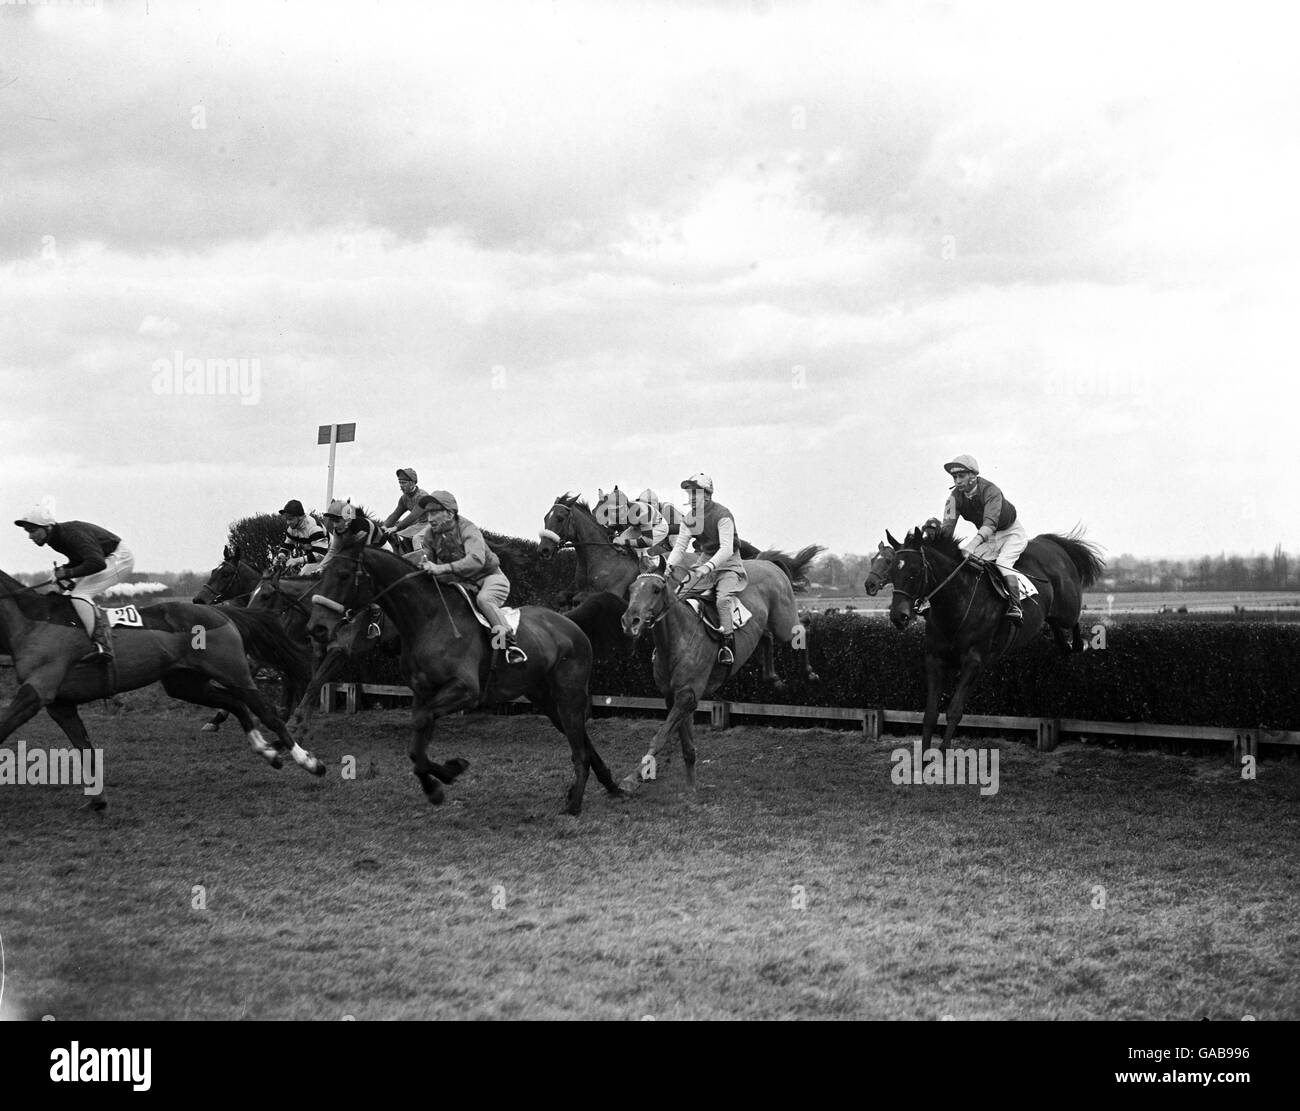 Action from the Stones Ginger Wine Handicap Steeplechase, featuring Dunkirk (r), W Rees up, and Man of the East (second r), J Morrissey up Stock Photo